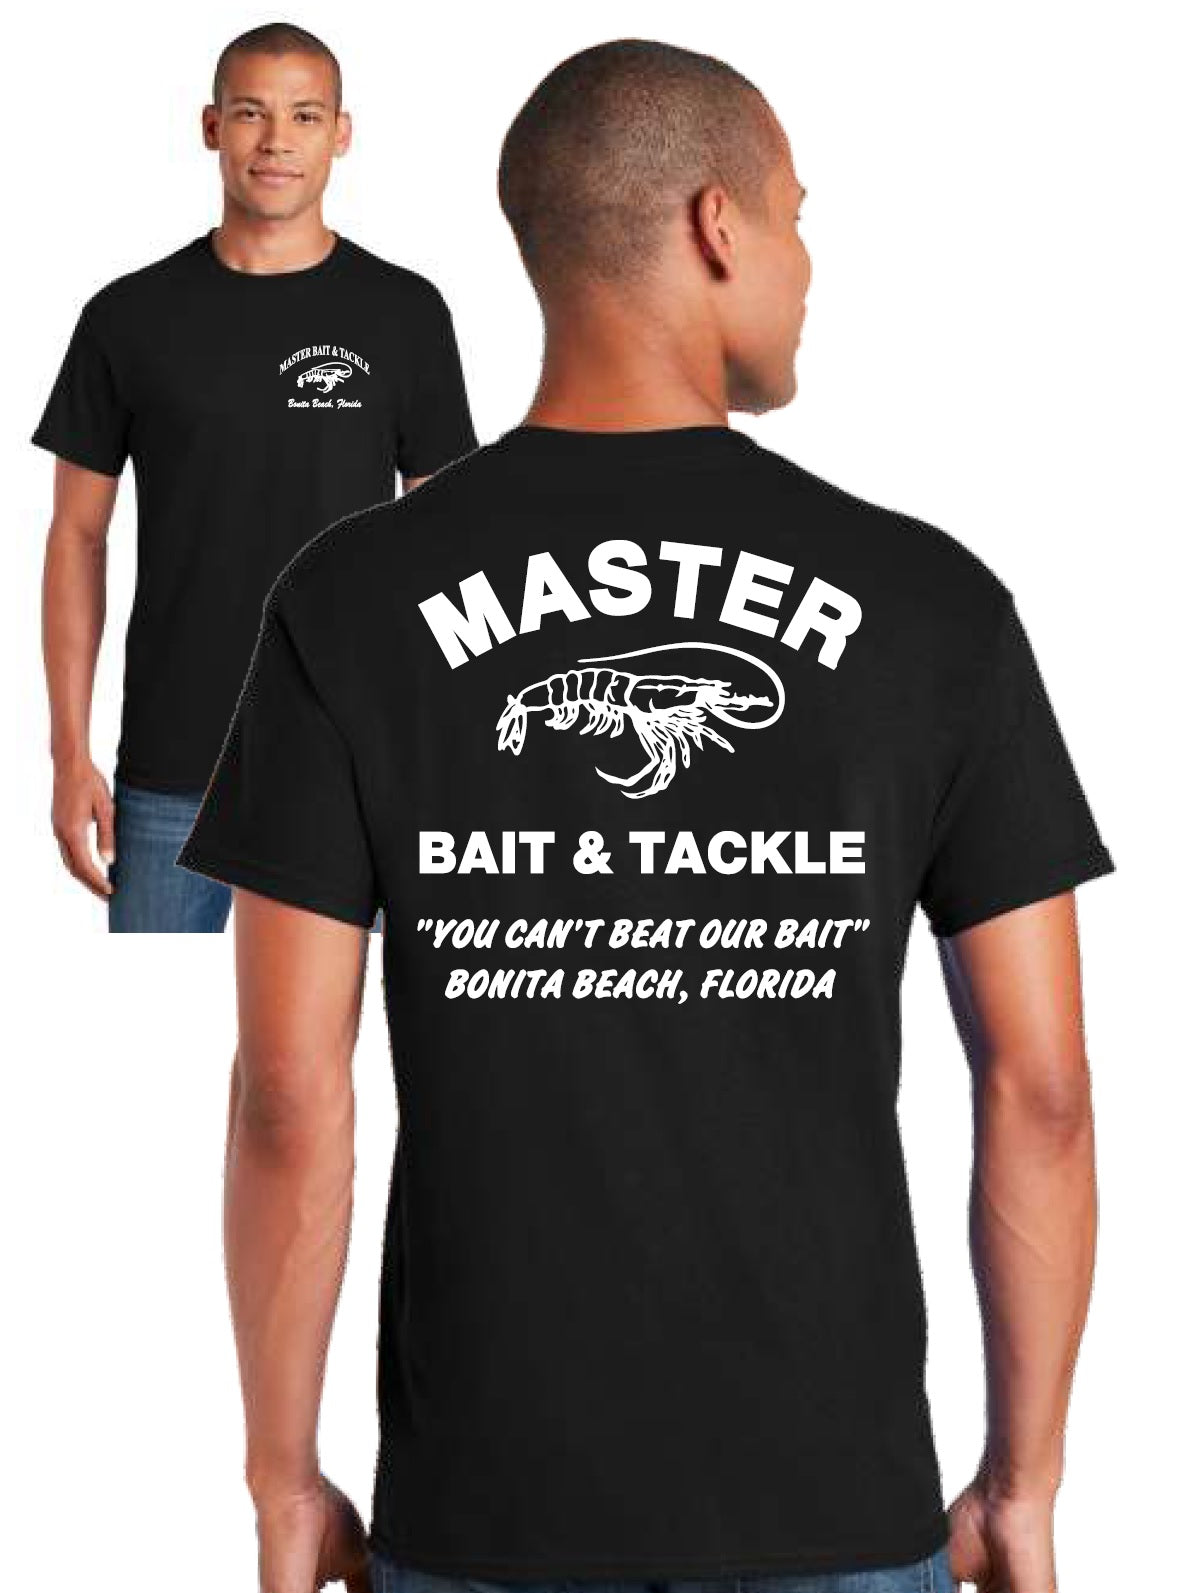 Master Baiter Shirt Funny Fishing Shirts for Men S, Black : Generic:  : Clothing, Shoes & Accessories